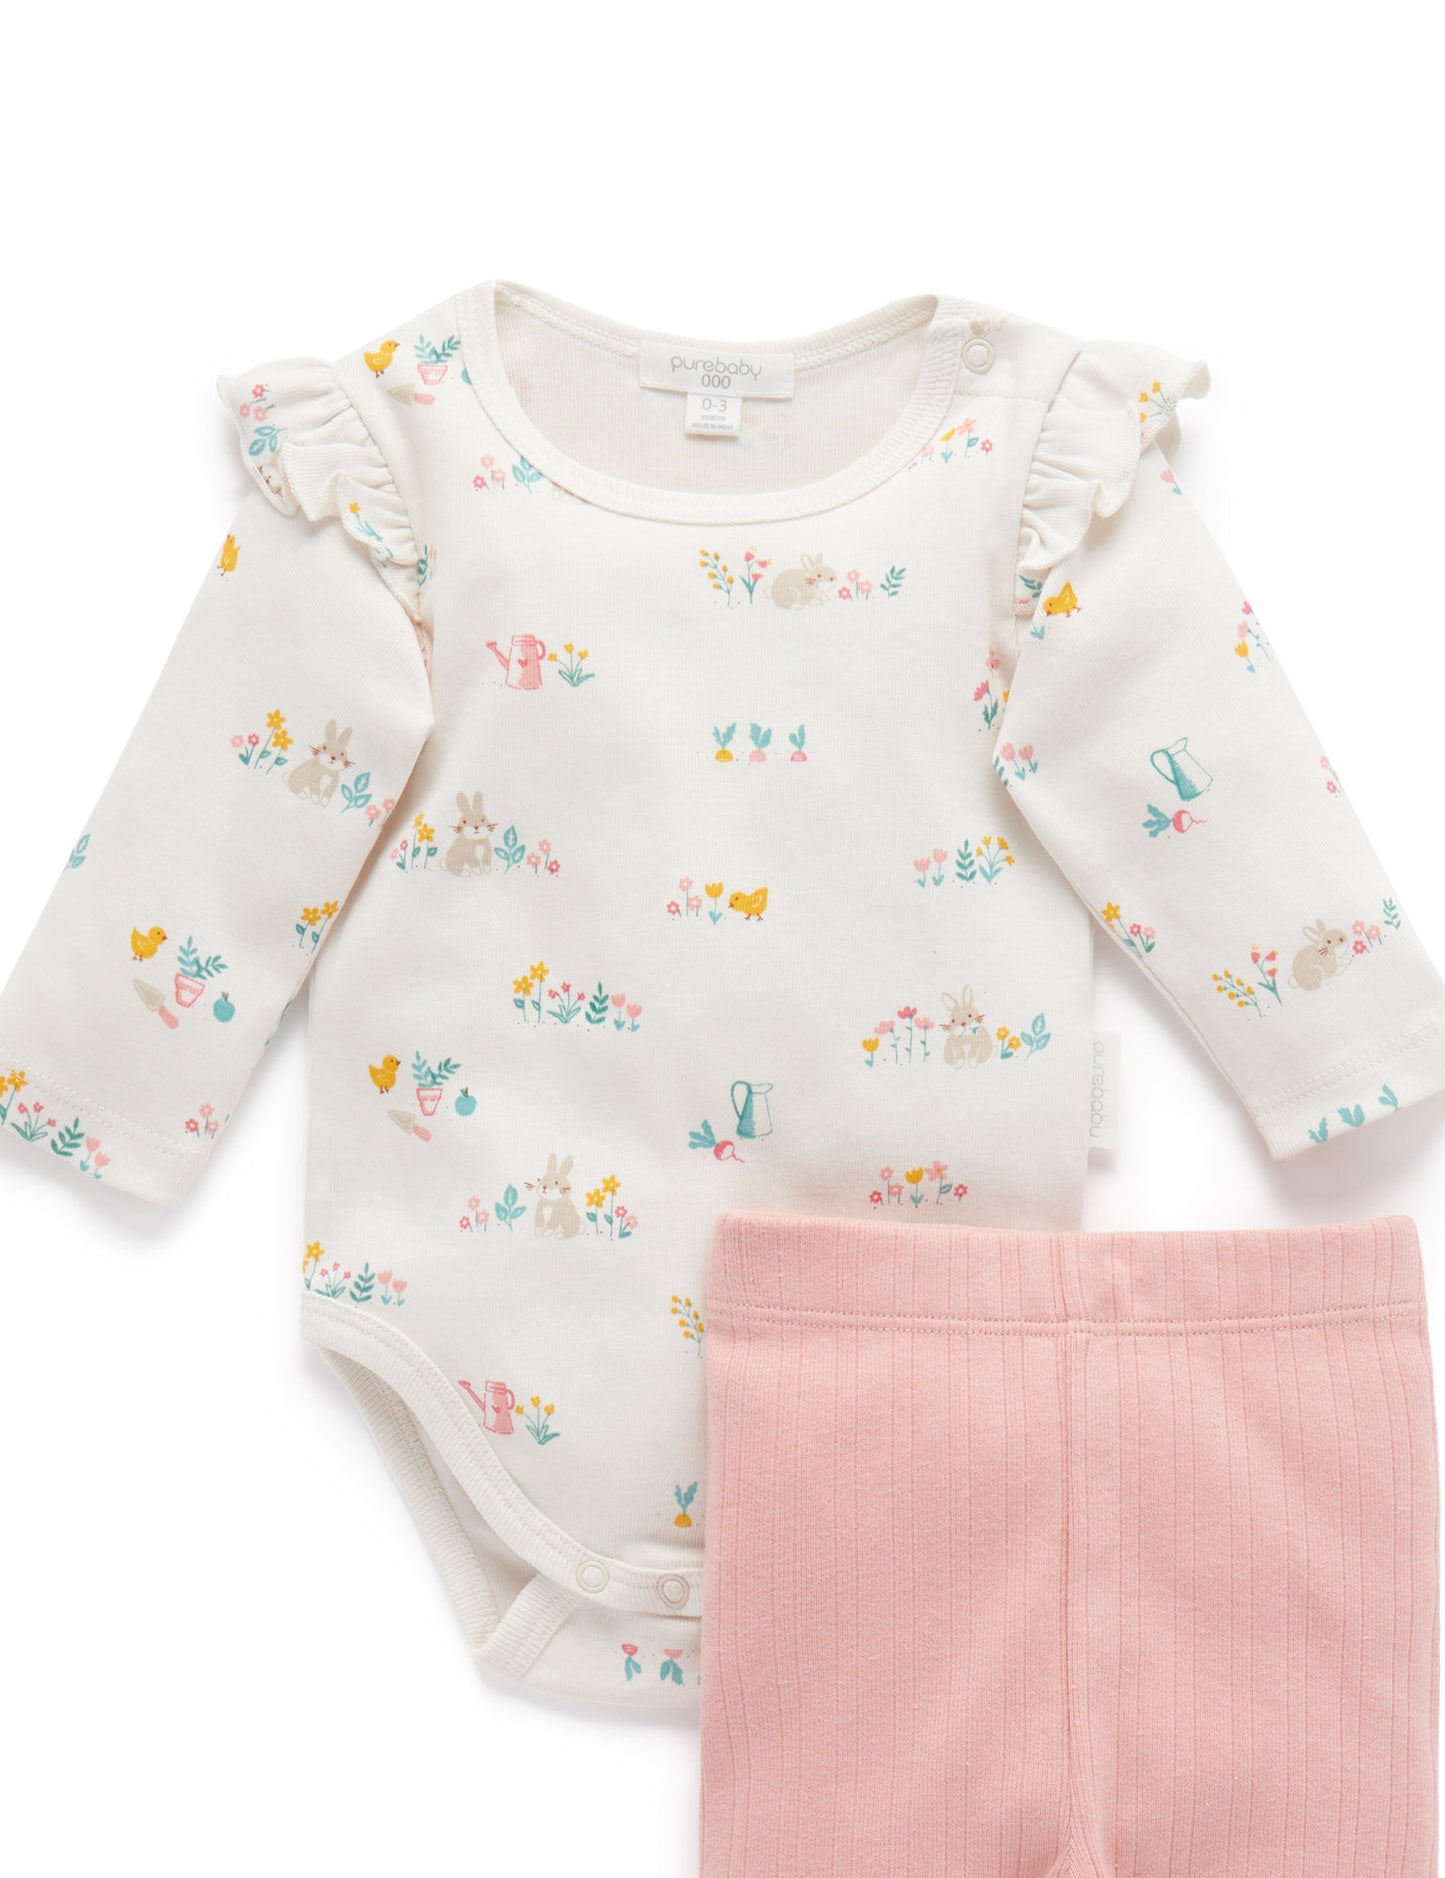 【00 last one】Purebaby ピュアベビー　2 Pieces Gift Pack  Flower Patch Print  PN1000S21